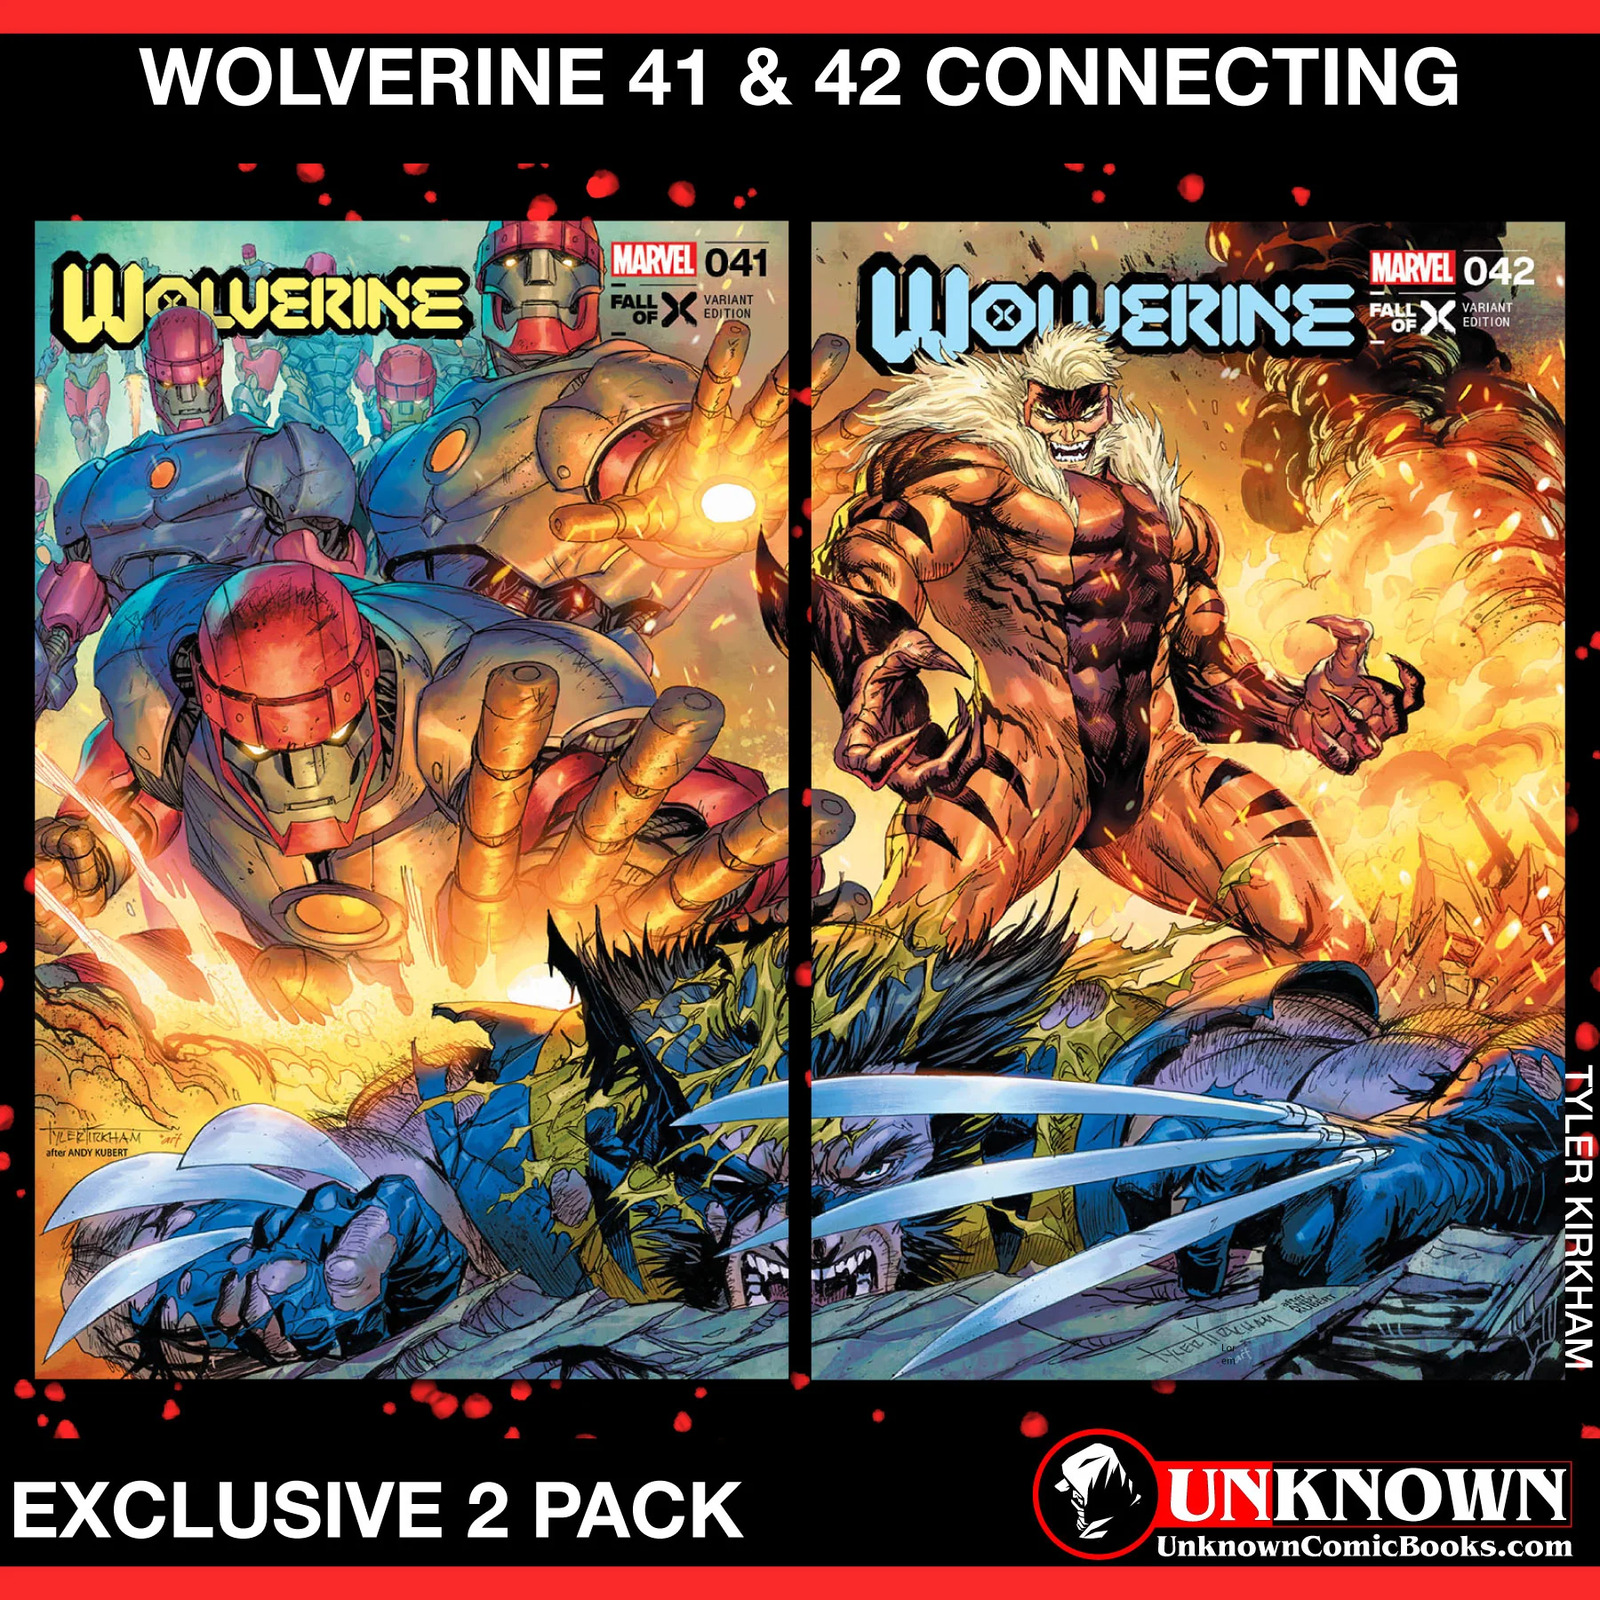 [2 PACK TRADE] WOLVERINE #41 & #42 UNKNOWN COMICS TYLER KIRKHAM EXCLUSIVE CONNEC